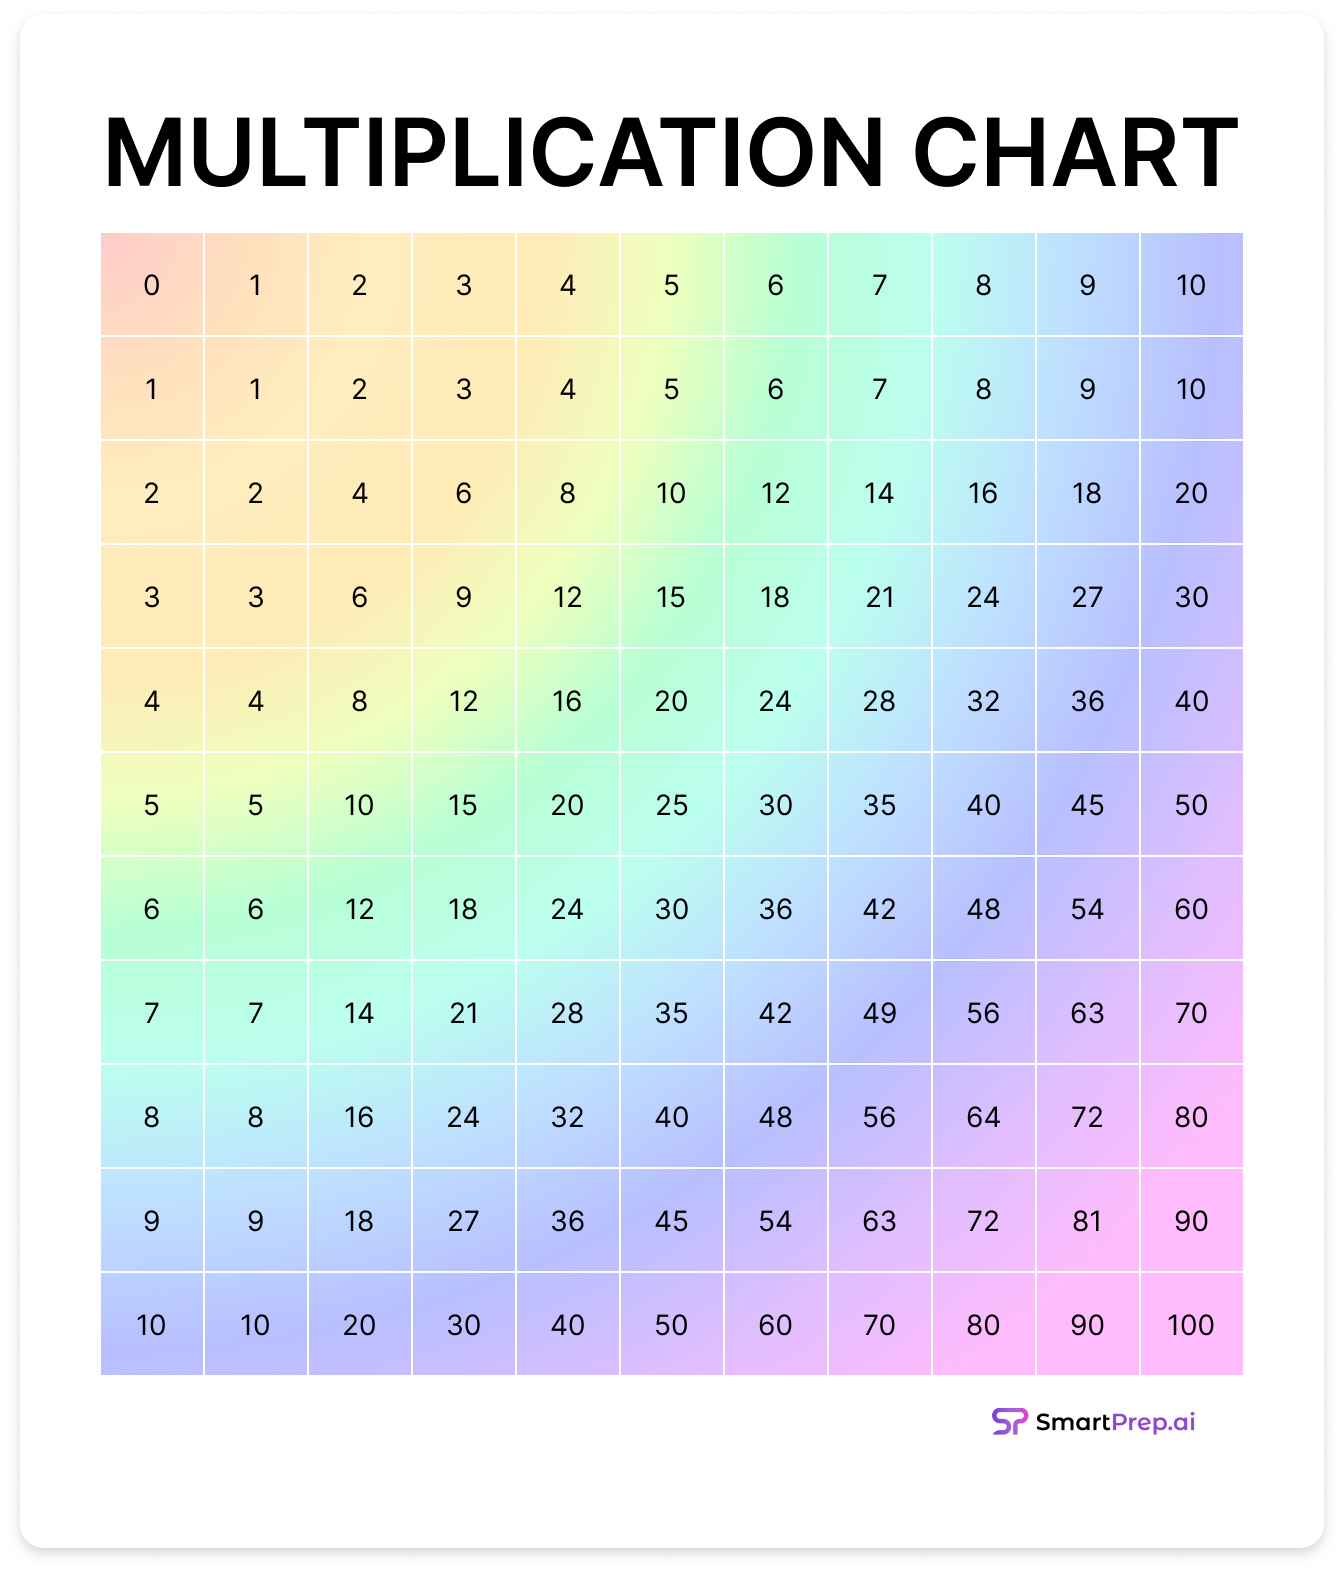 Mastering the Basics: The Power and Practice of the Multiplication Chart